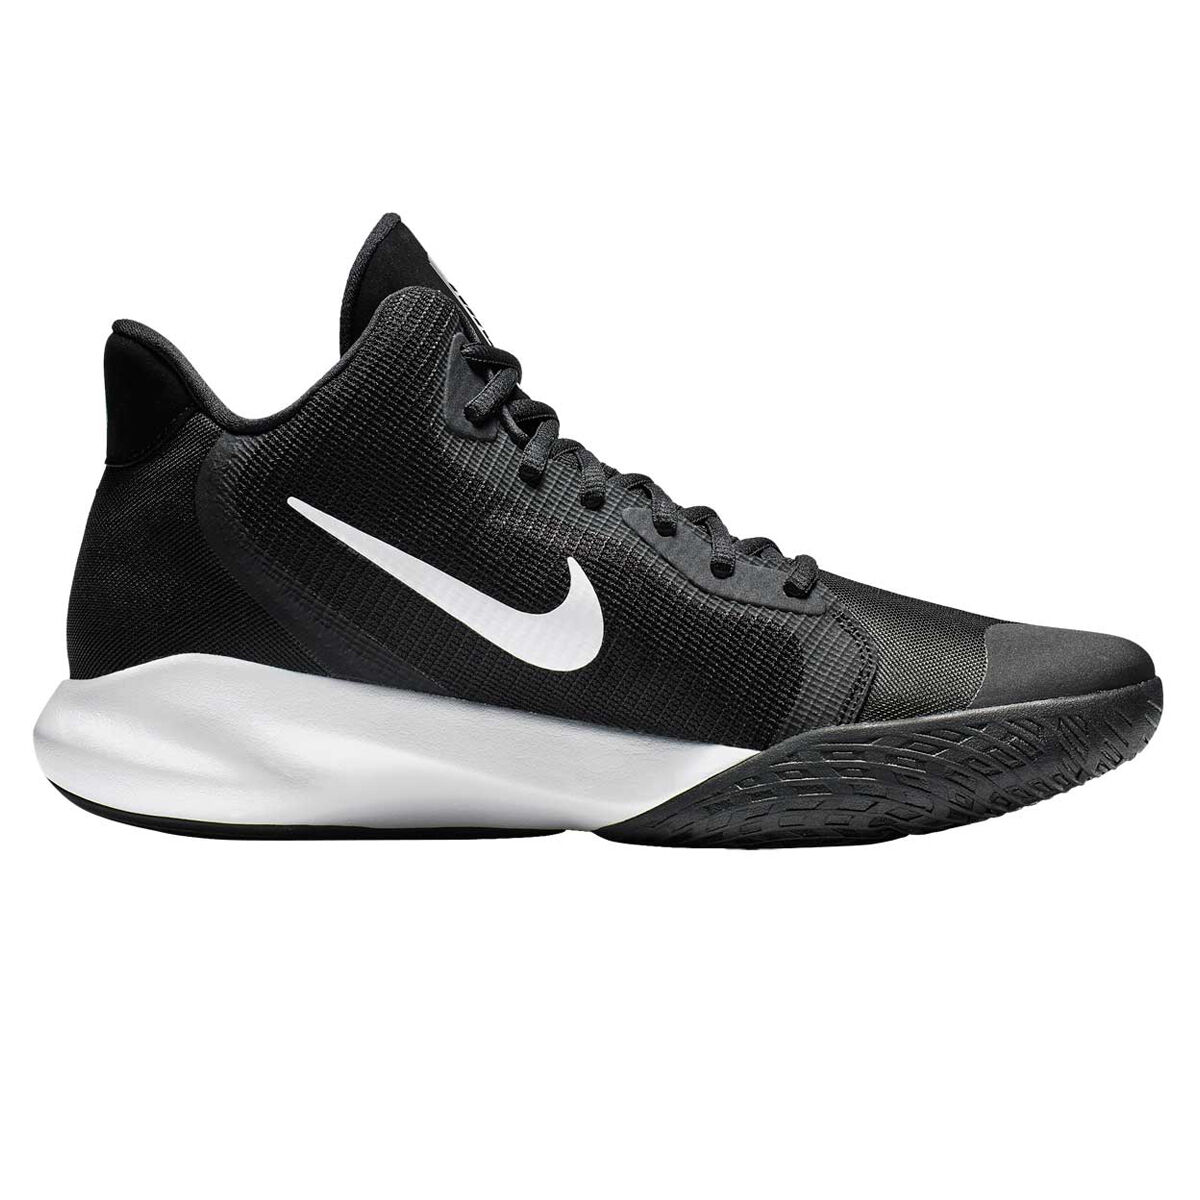 nike precision 3 basketball shoes review